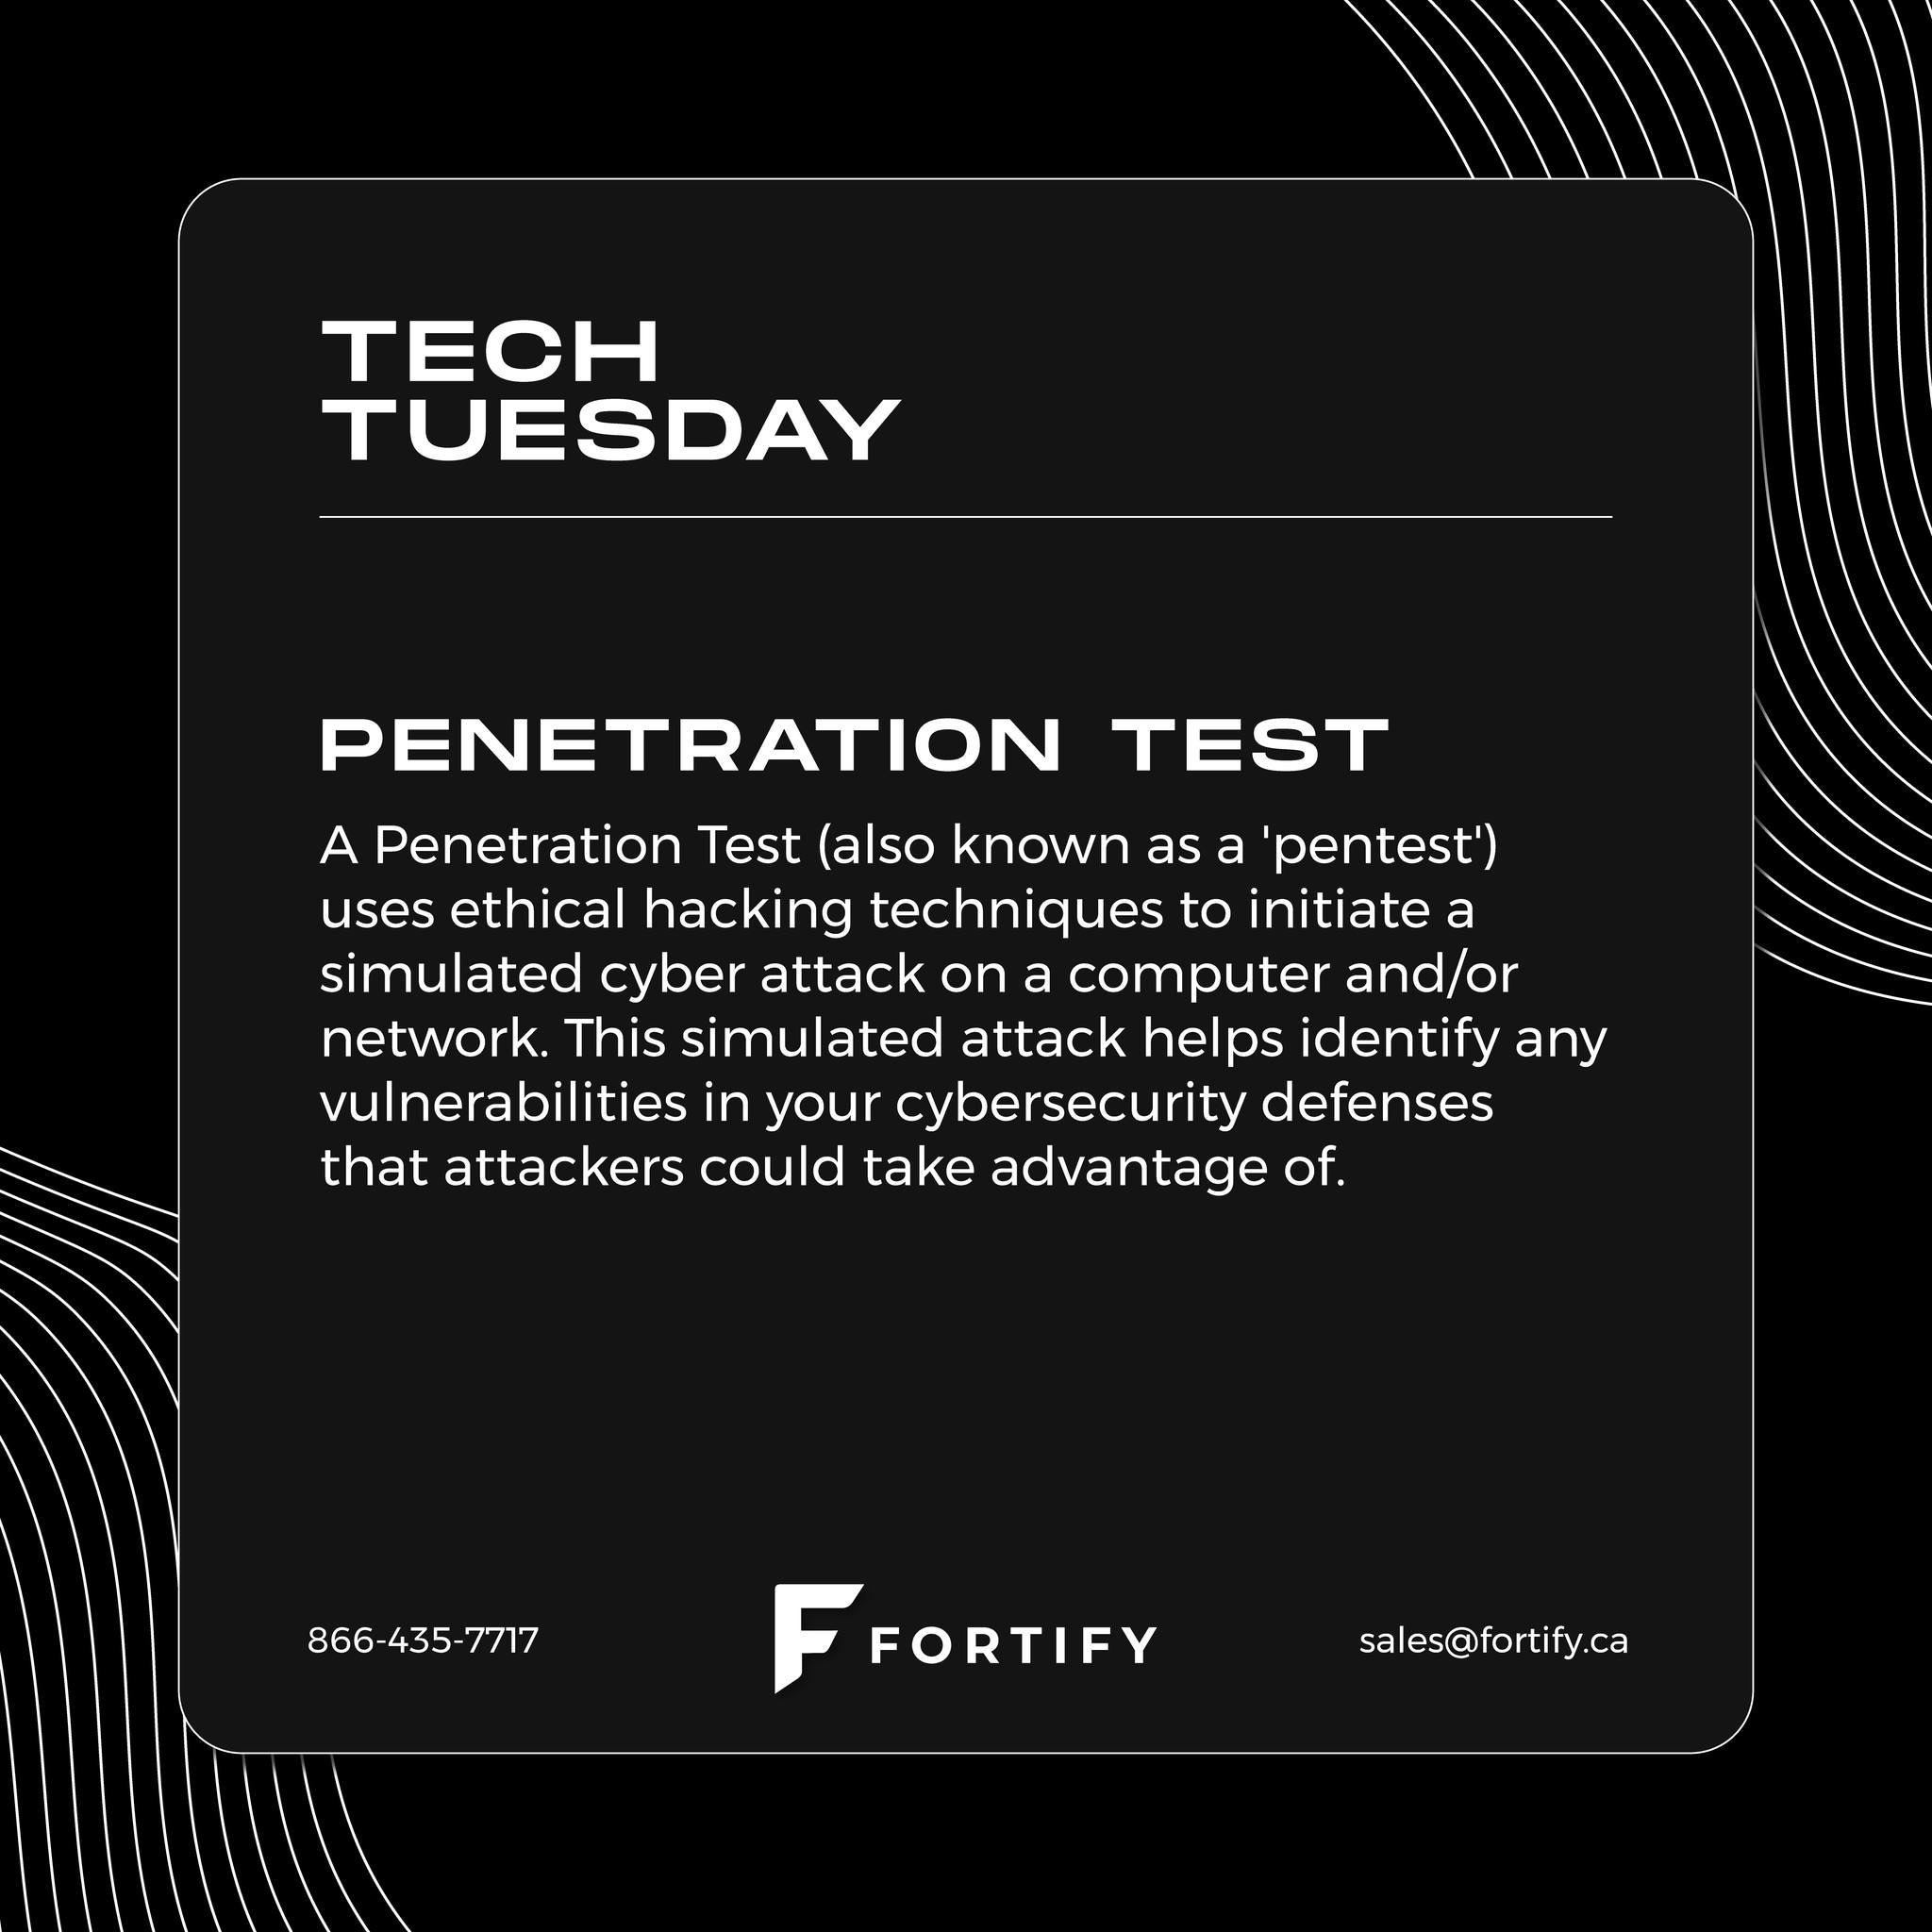 TECH TUESDAY: Ever heard the term &quot;pentest&quot;? Here's what it means: 

#EveryBusinessFortified #penetrationtest #cybersecurity #technology #MSP